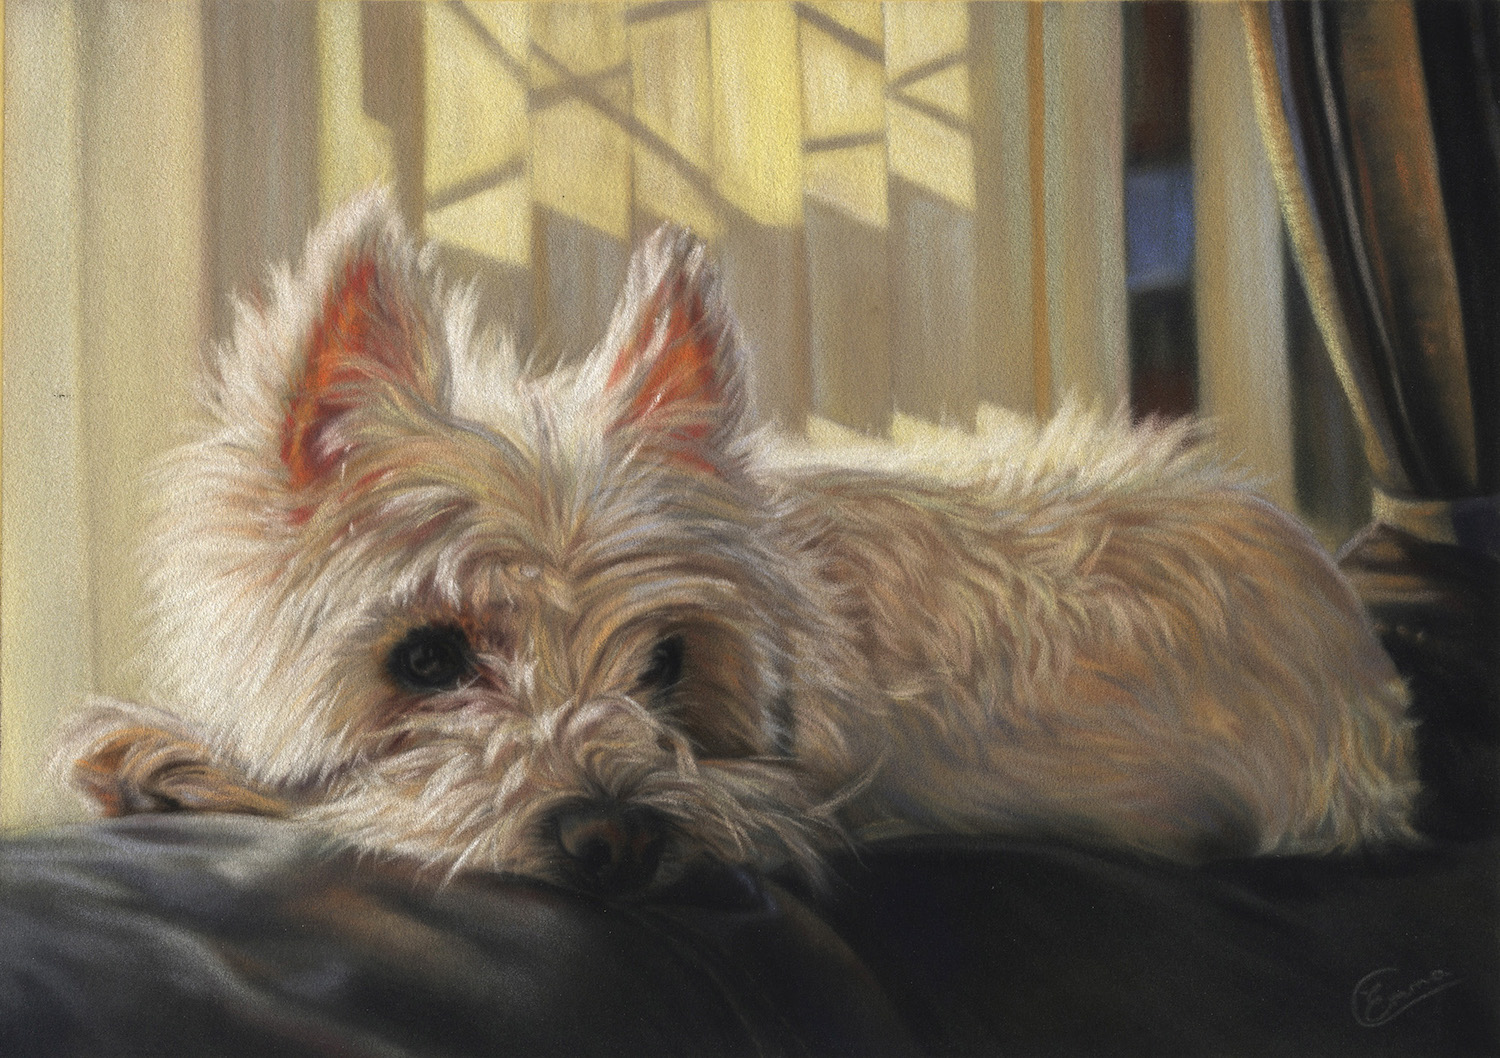 Emma Colbert, "Fluffy," 2015, Unison pastels on Hahnemühle velour paper 12 x 10 in. Commissioned Portrait